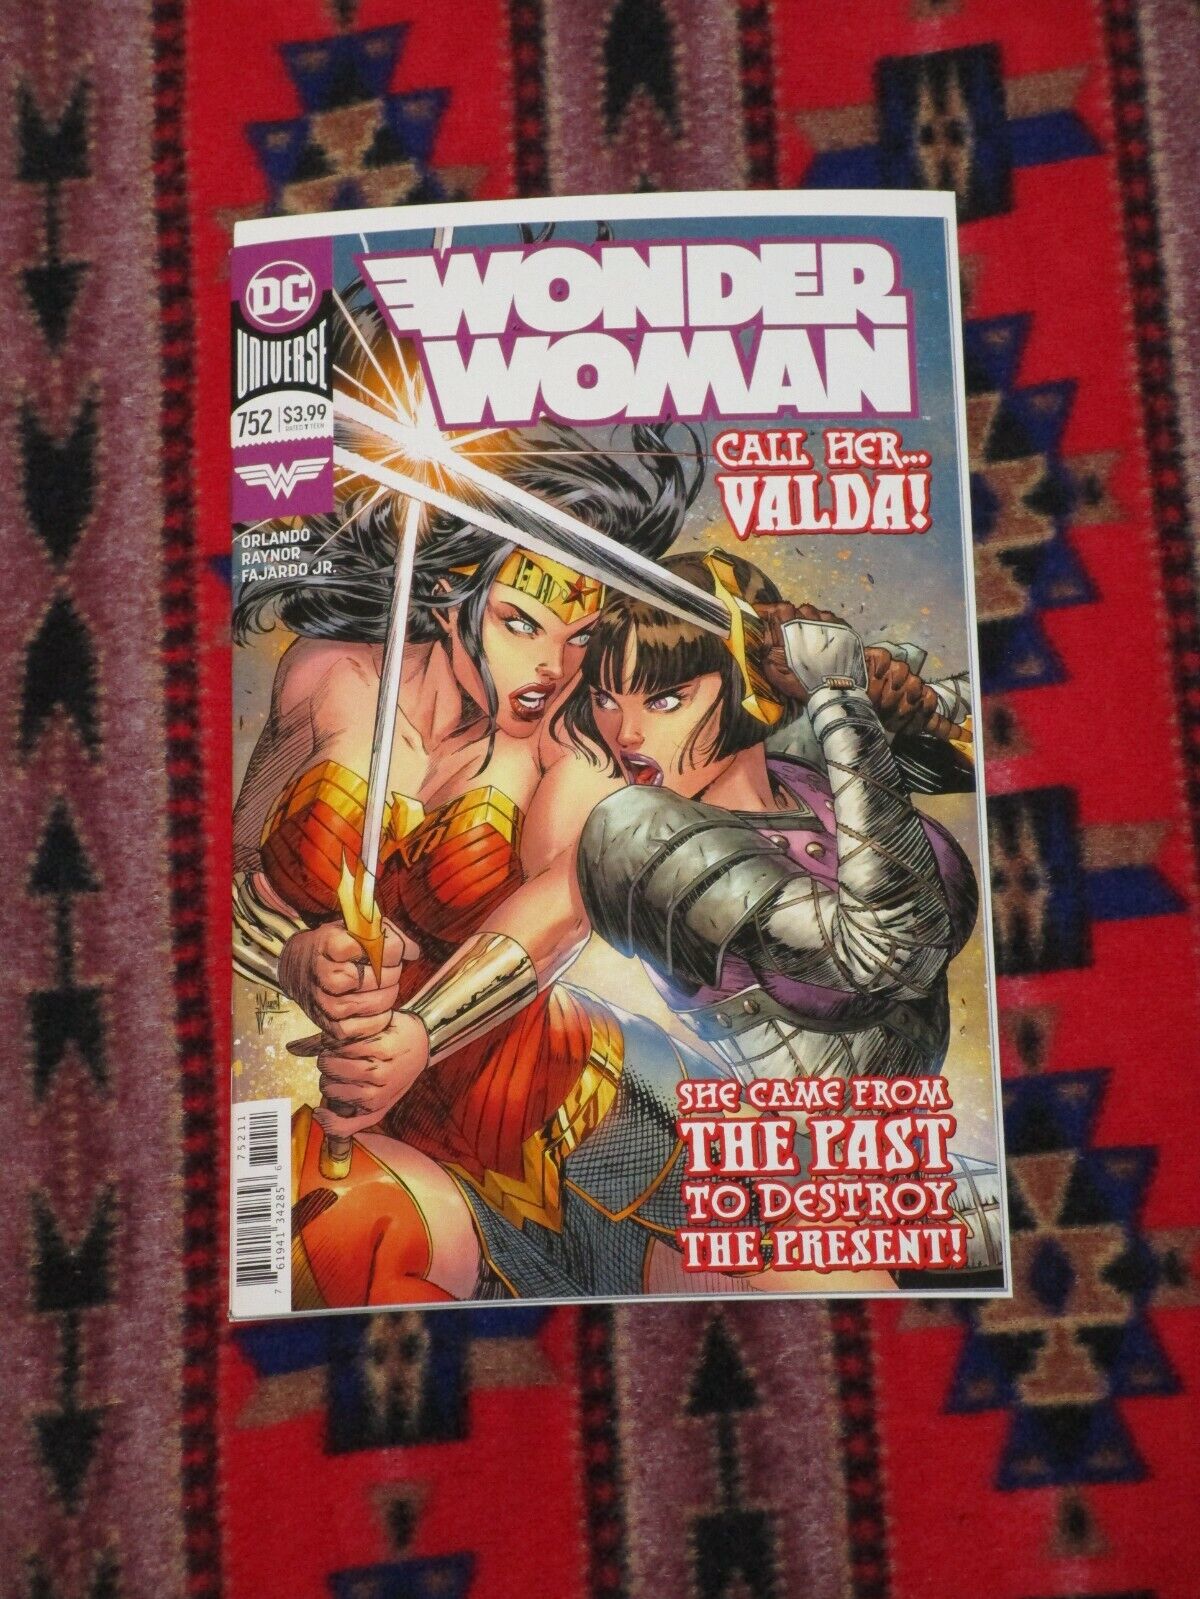 Wonder Woman #752 Late April 2020 (Steve Orlando and Max Raynor)